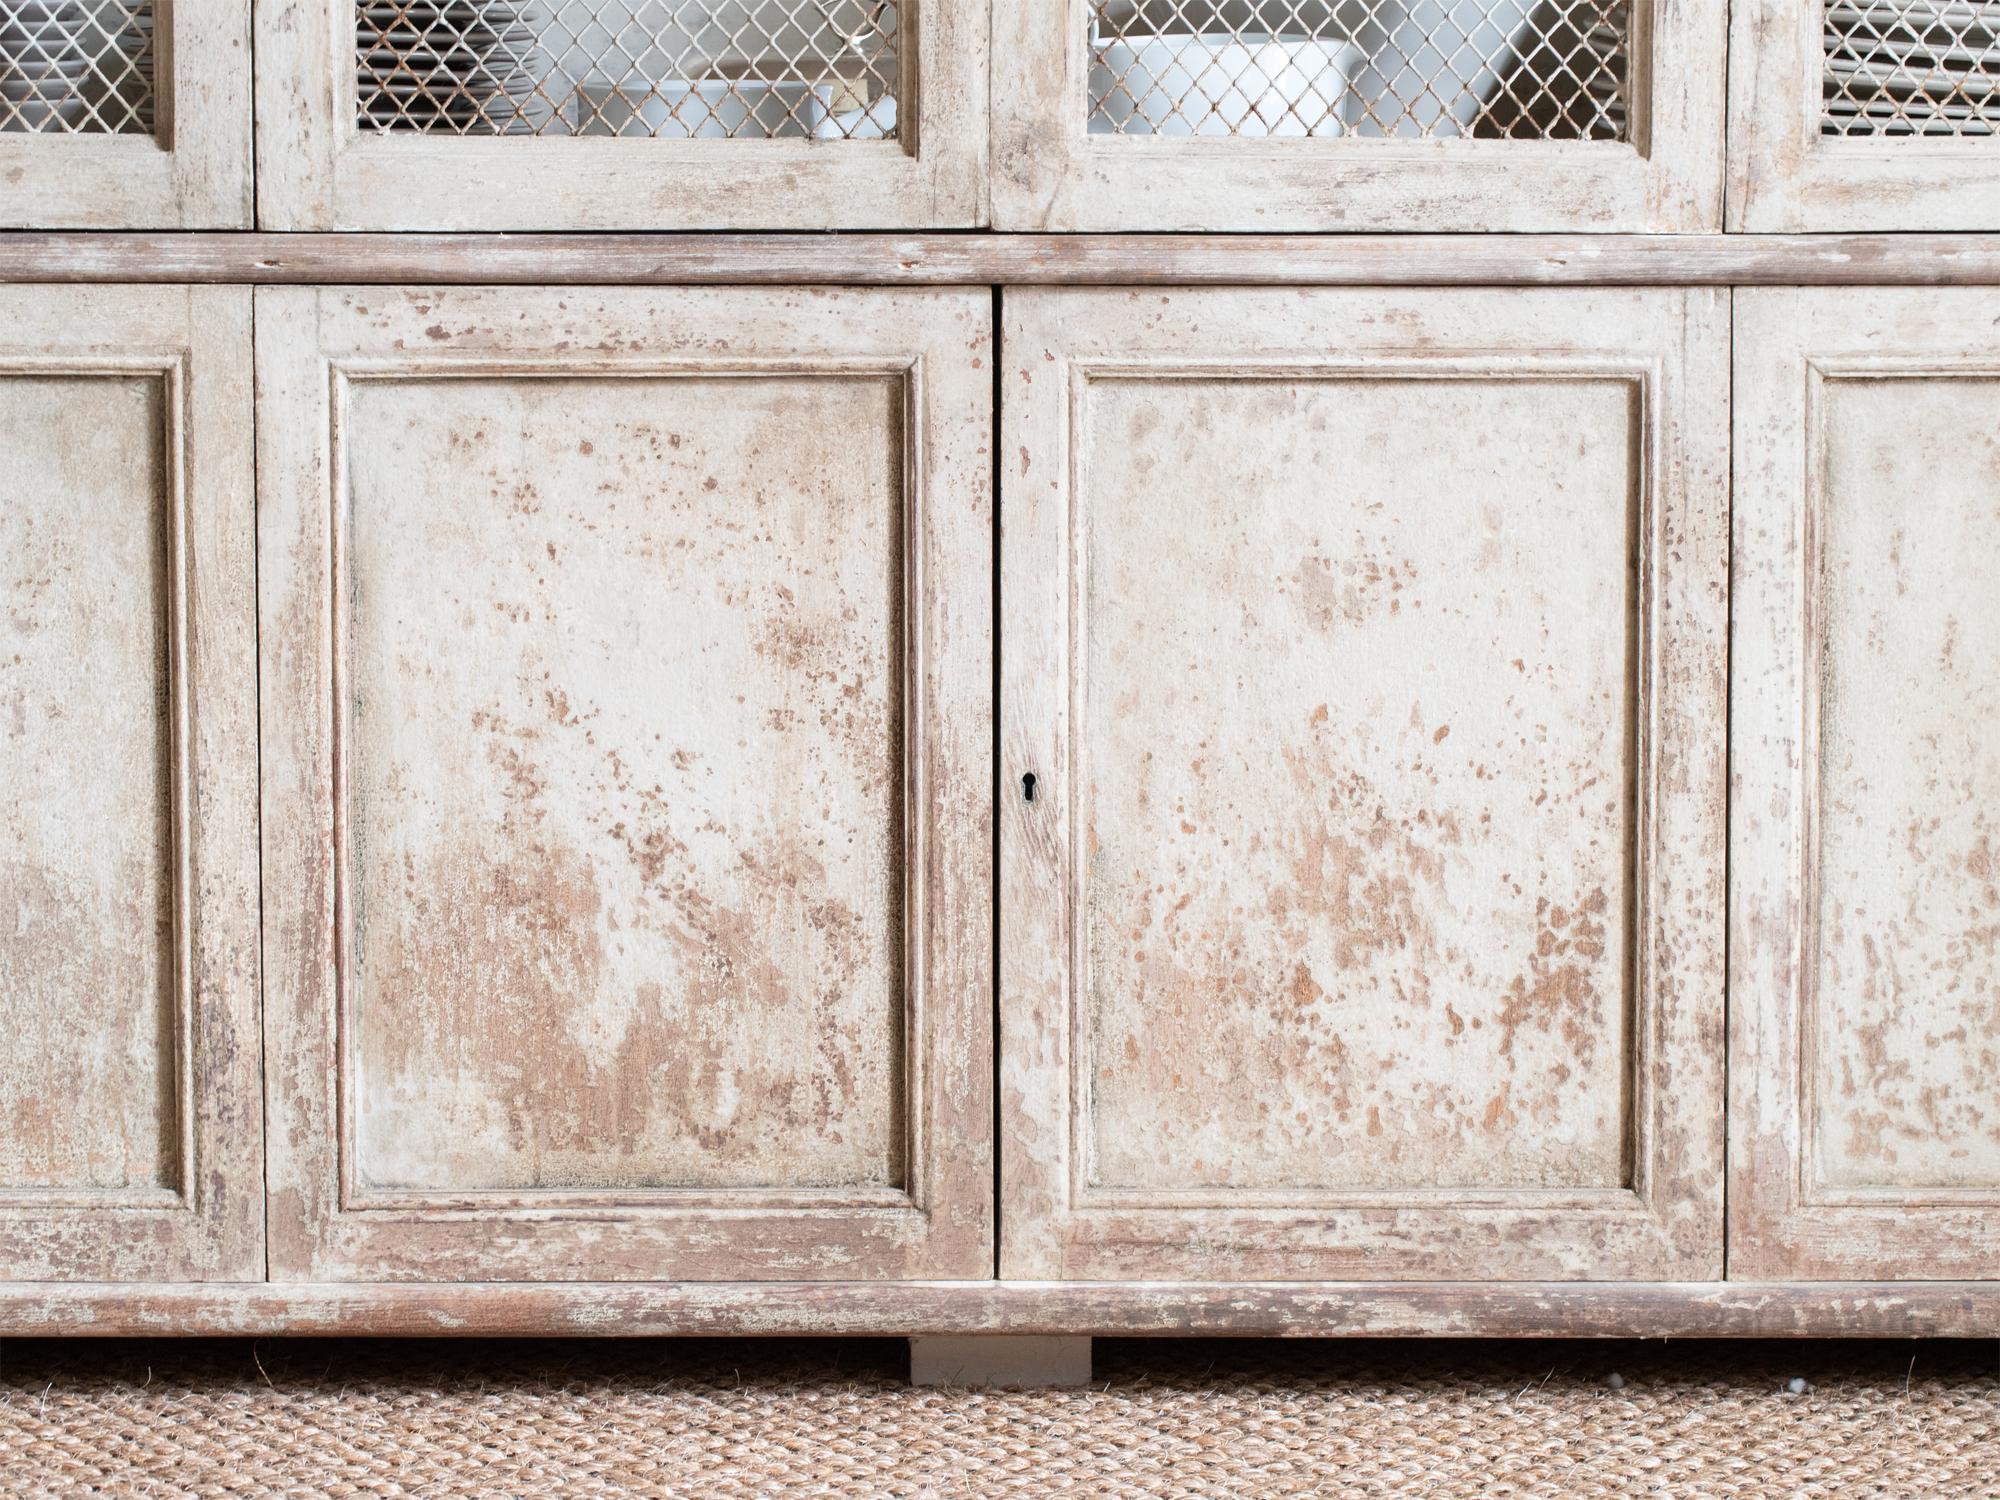 Continental Painted Breakfront Cupboard c. 1800 In Good Condition For Sale In Wembley, GB